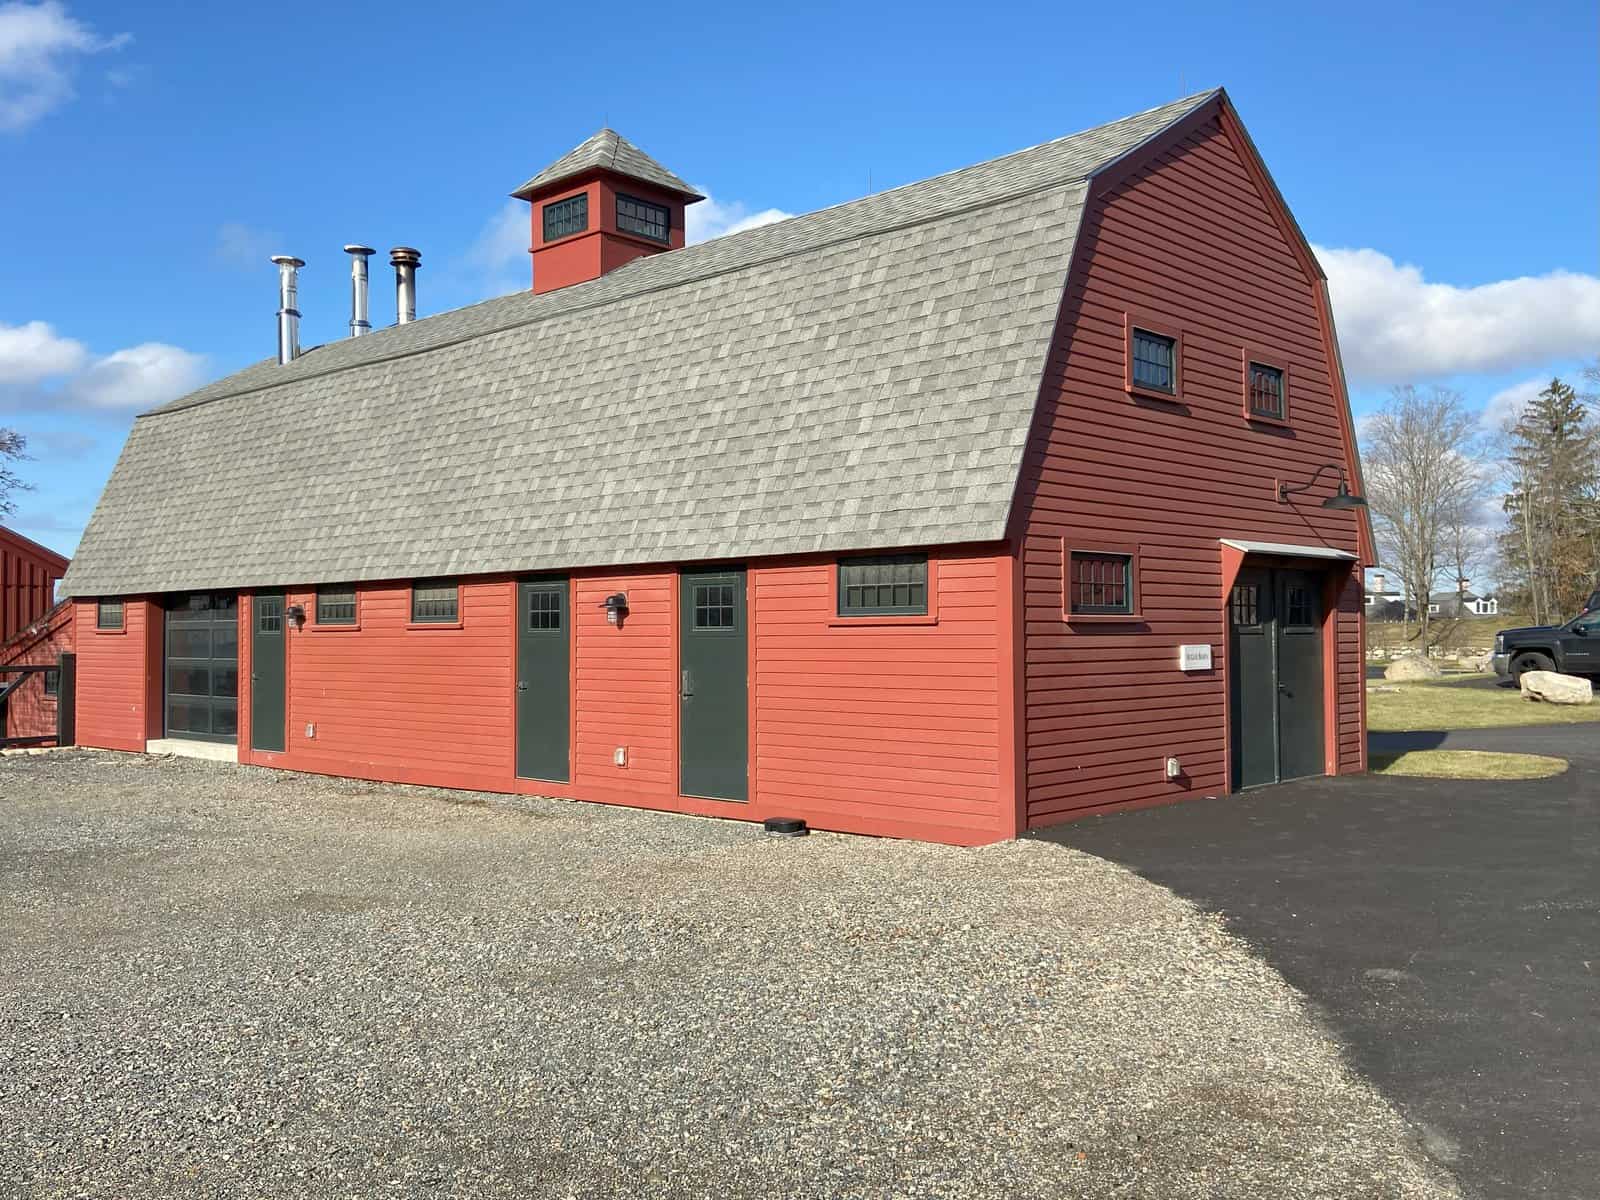 The renovated barn produces 200 gallons of maple sugar each year from 650 taps on the property. The doors and windows were replaced, and a cupola that lights up at night was added to improve the property's aesthetic appeal.